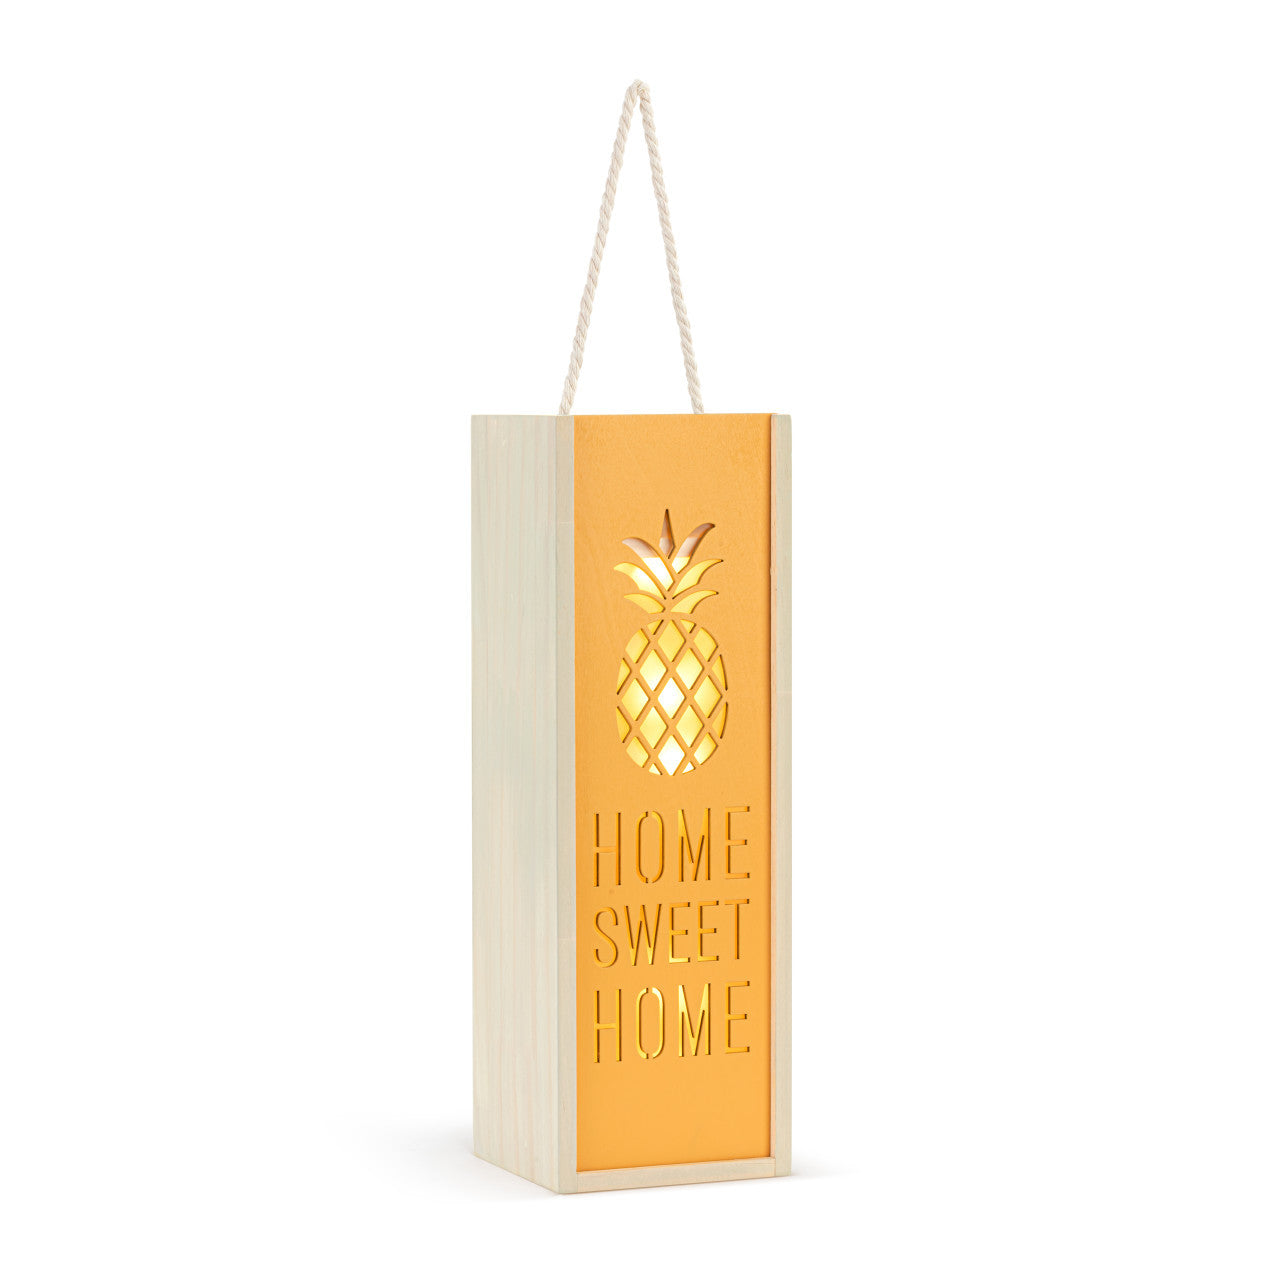 Demdaco Home Sweet Home Lantern available at The Good Life Boutique